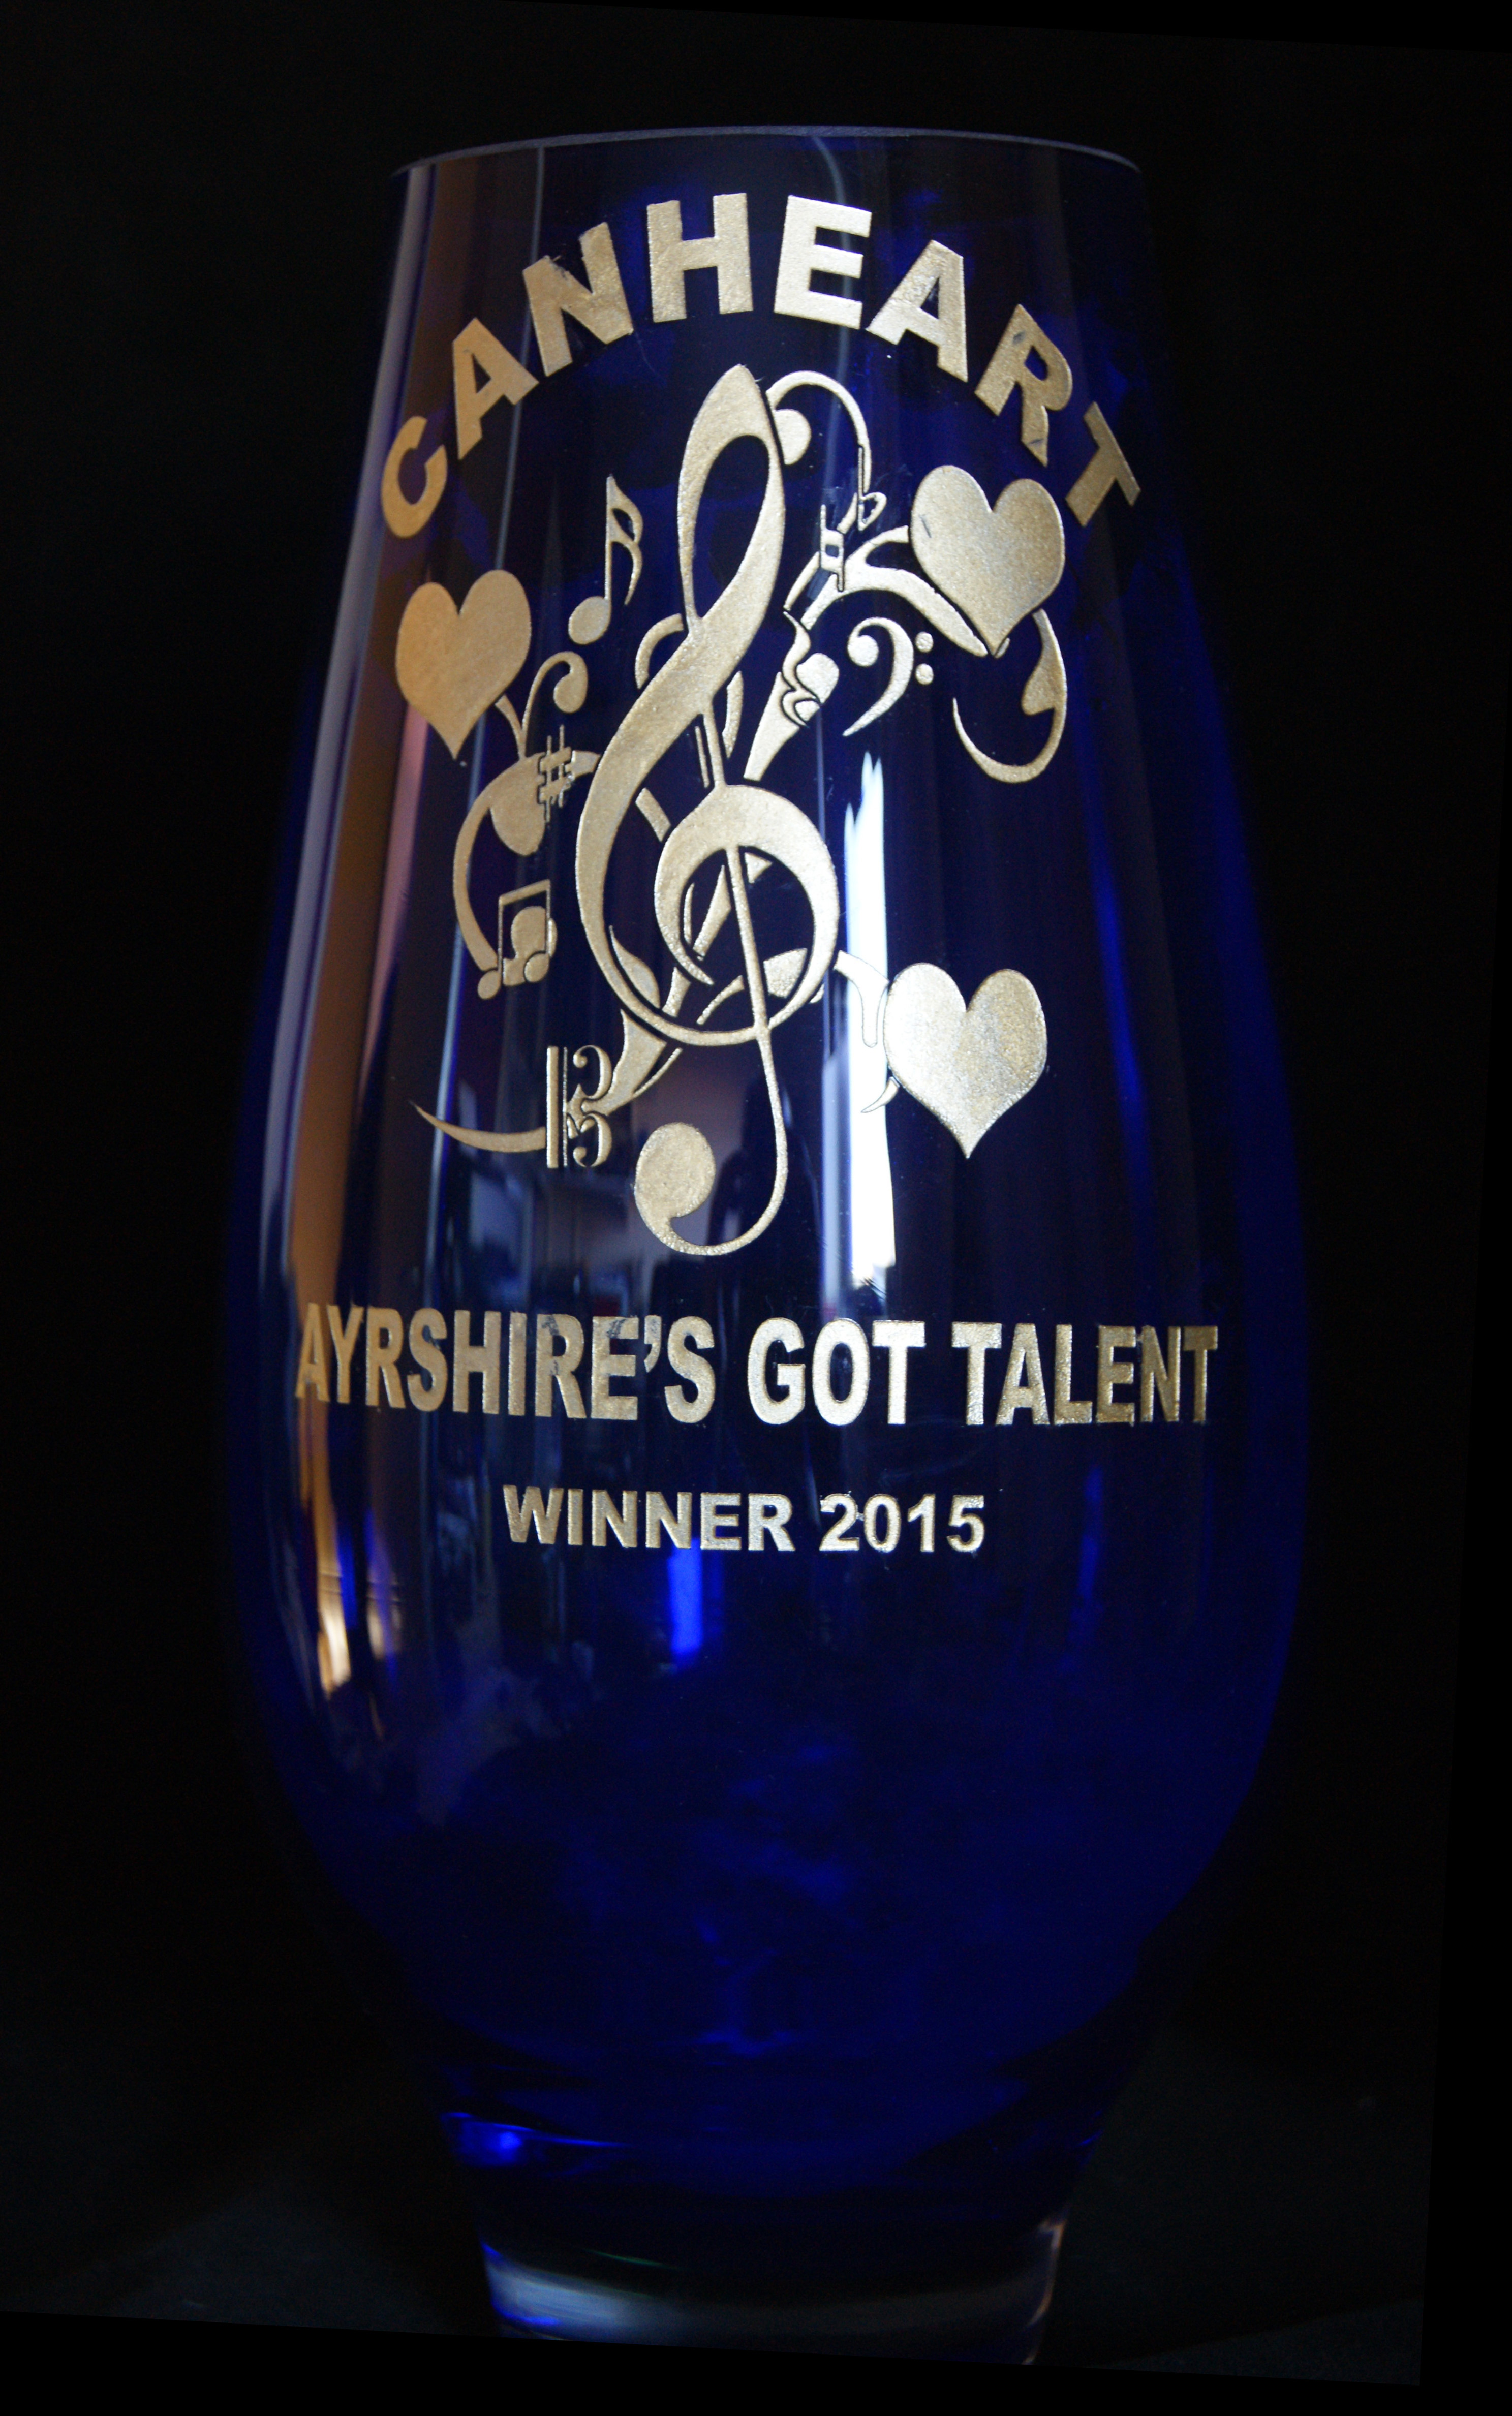 A deep blue vase with the CANHEART logo and Ayrshire's Got Talent engraved then infilled with gold